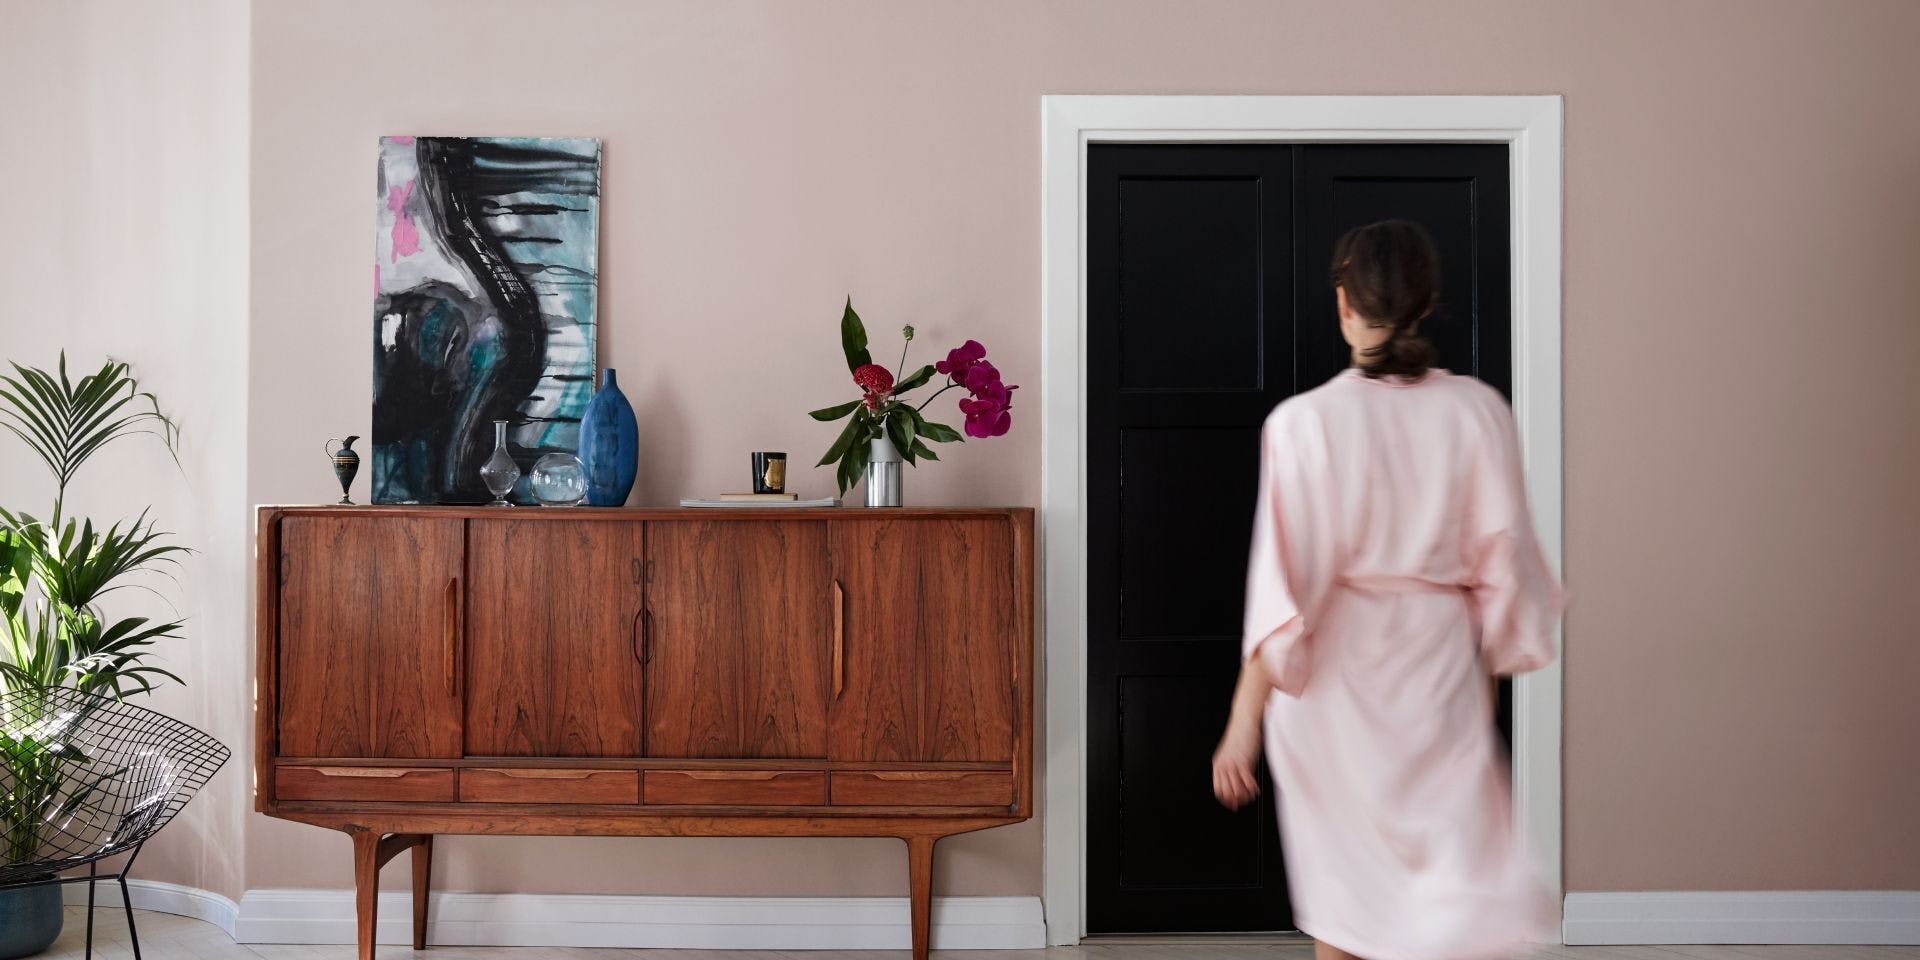 Back View of Woman in Pink Robe Walking Towards Door in Light Pink Room With Wooden Cabinet